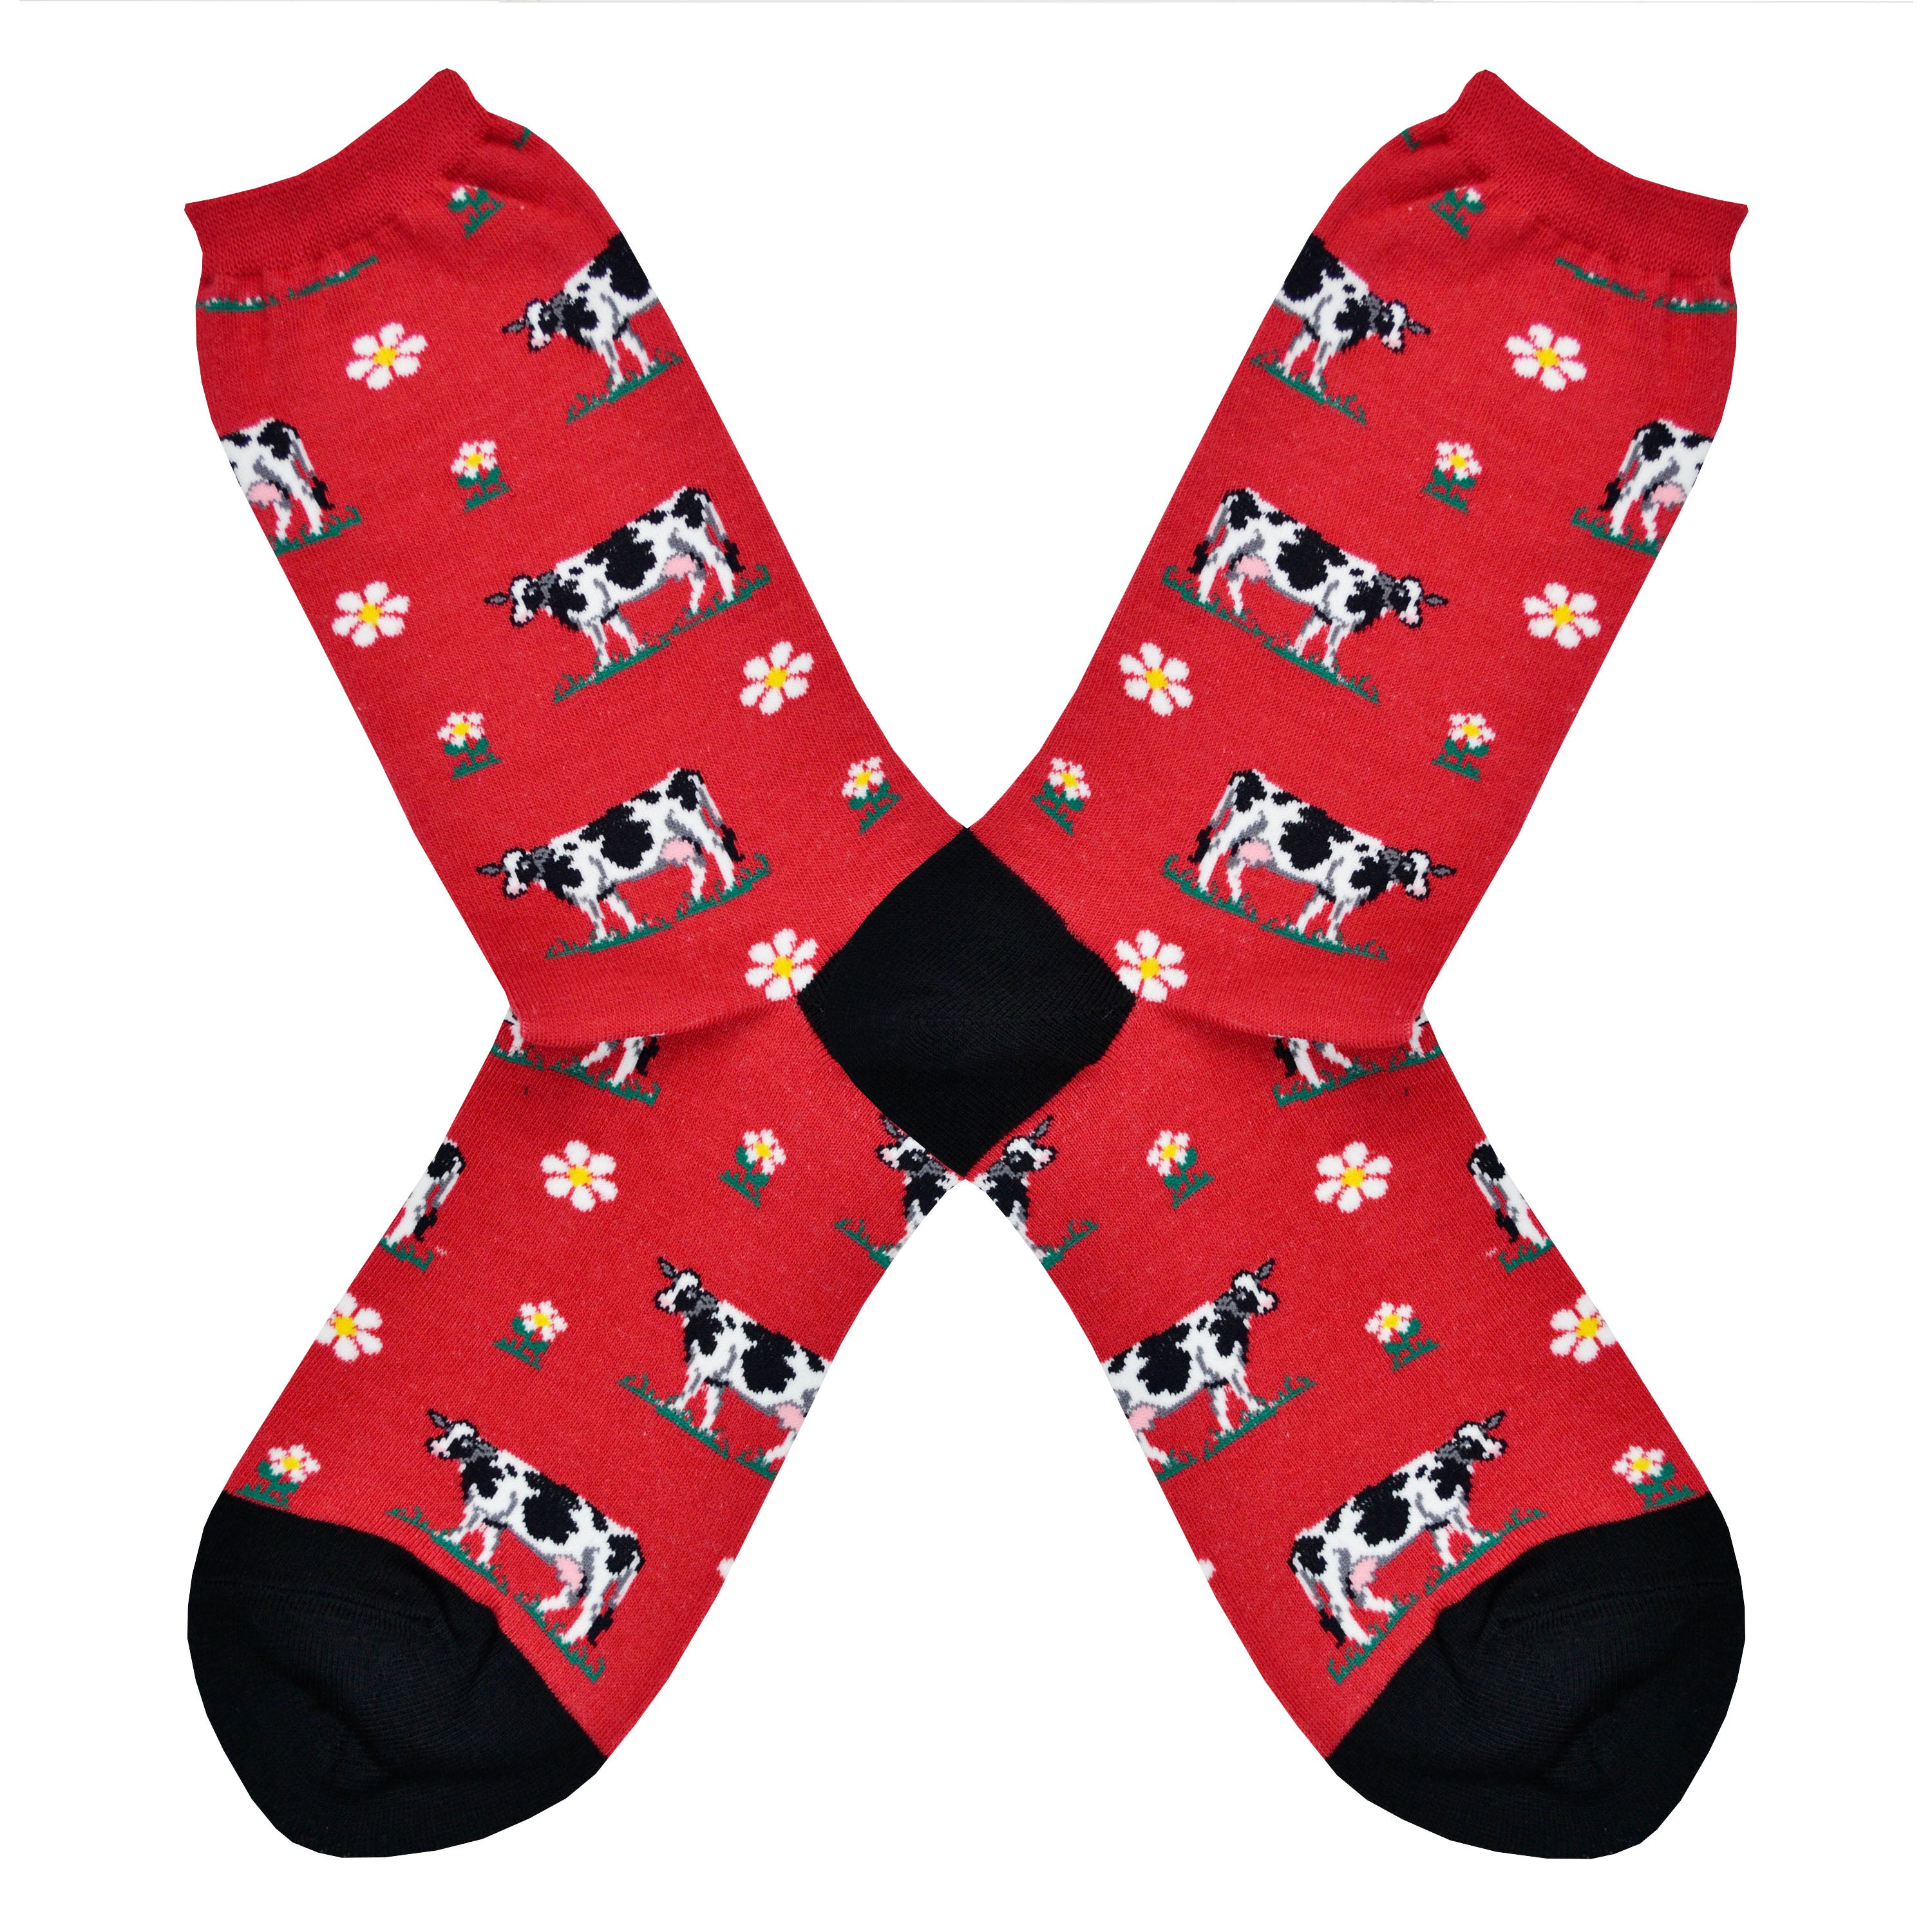 Shown in a flatlay, a pair of women red crew socks with a black heel and toe. The socks feature an all over design off black and white cows and little daisy's. 